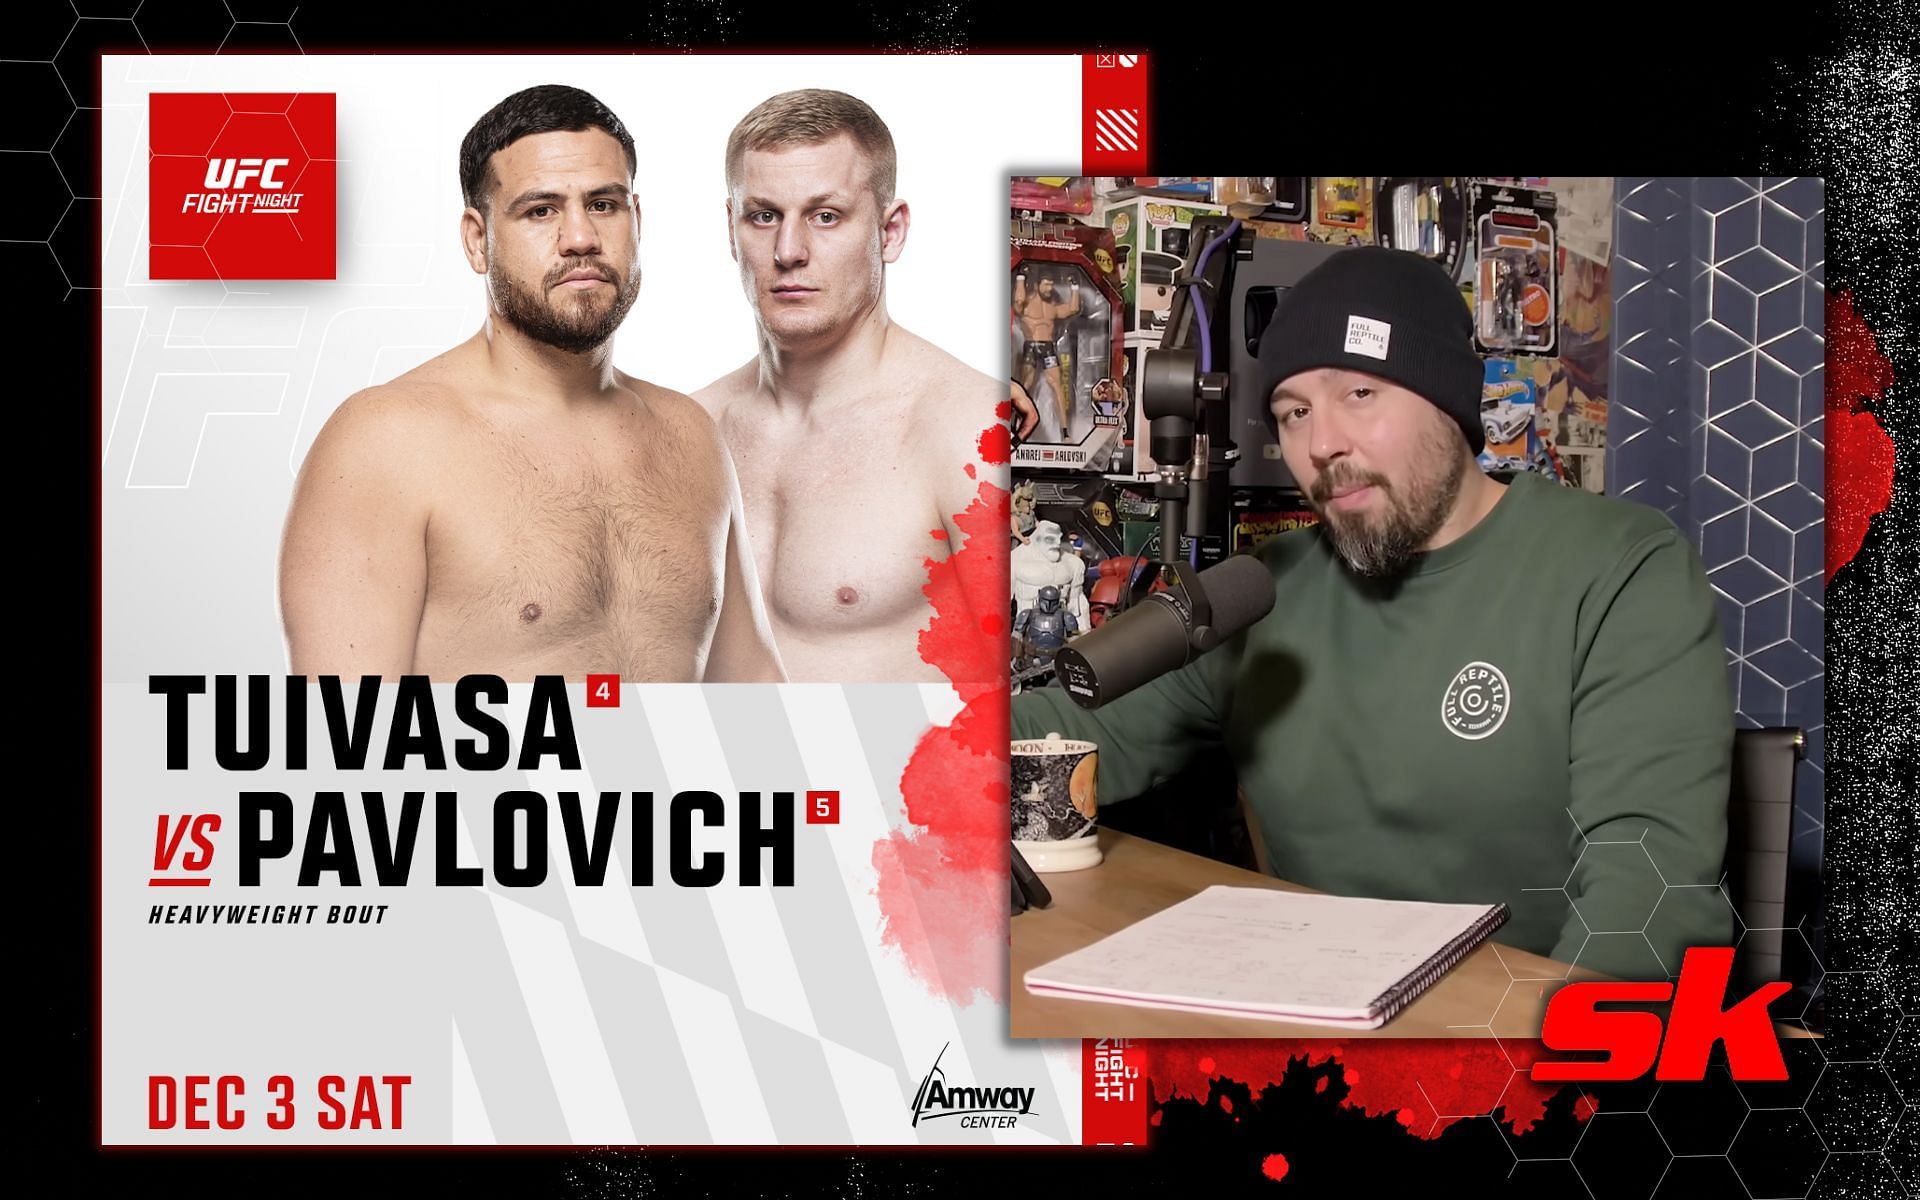 Tai Tuivasa will have his hands full weathering the initial storm against Sergei Pavlovich, explains Dan Hardy. [Image credits: youTube/DanHardy; @UFC on Twitter]